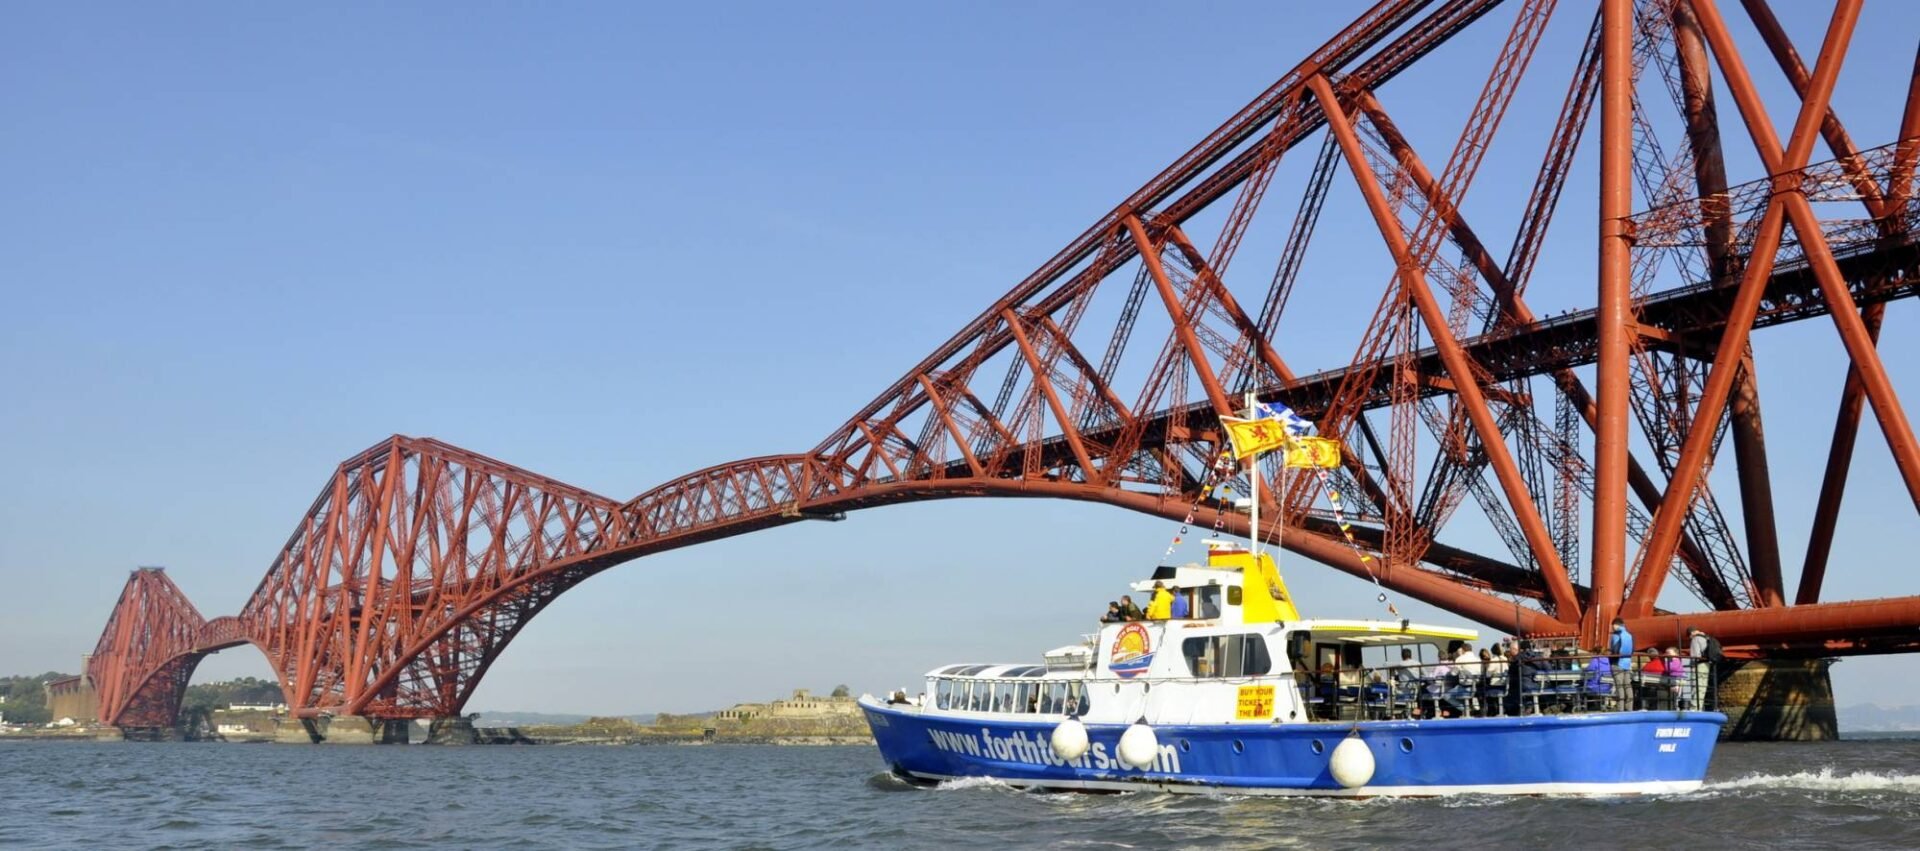 Forth Boat Tours Three Bridges Cruise, Forth Boat Tours